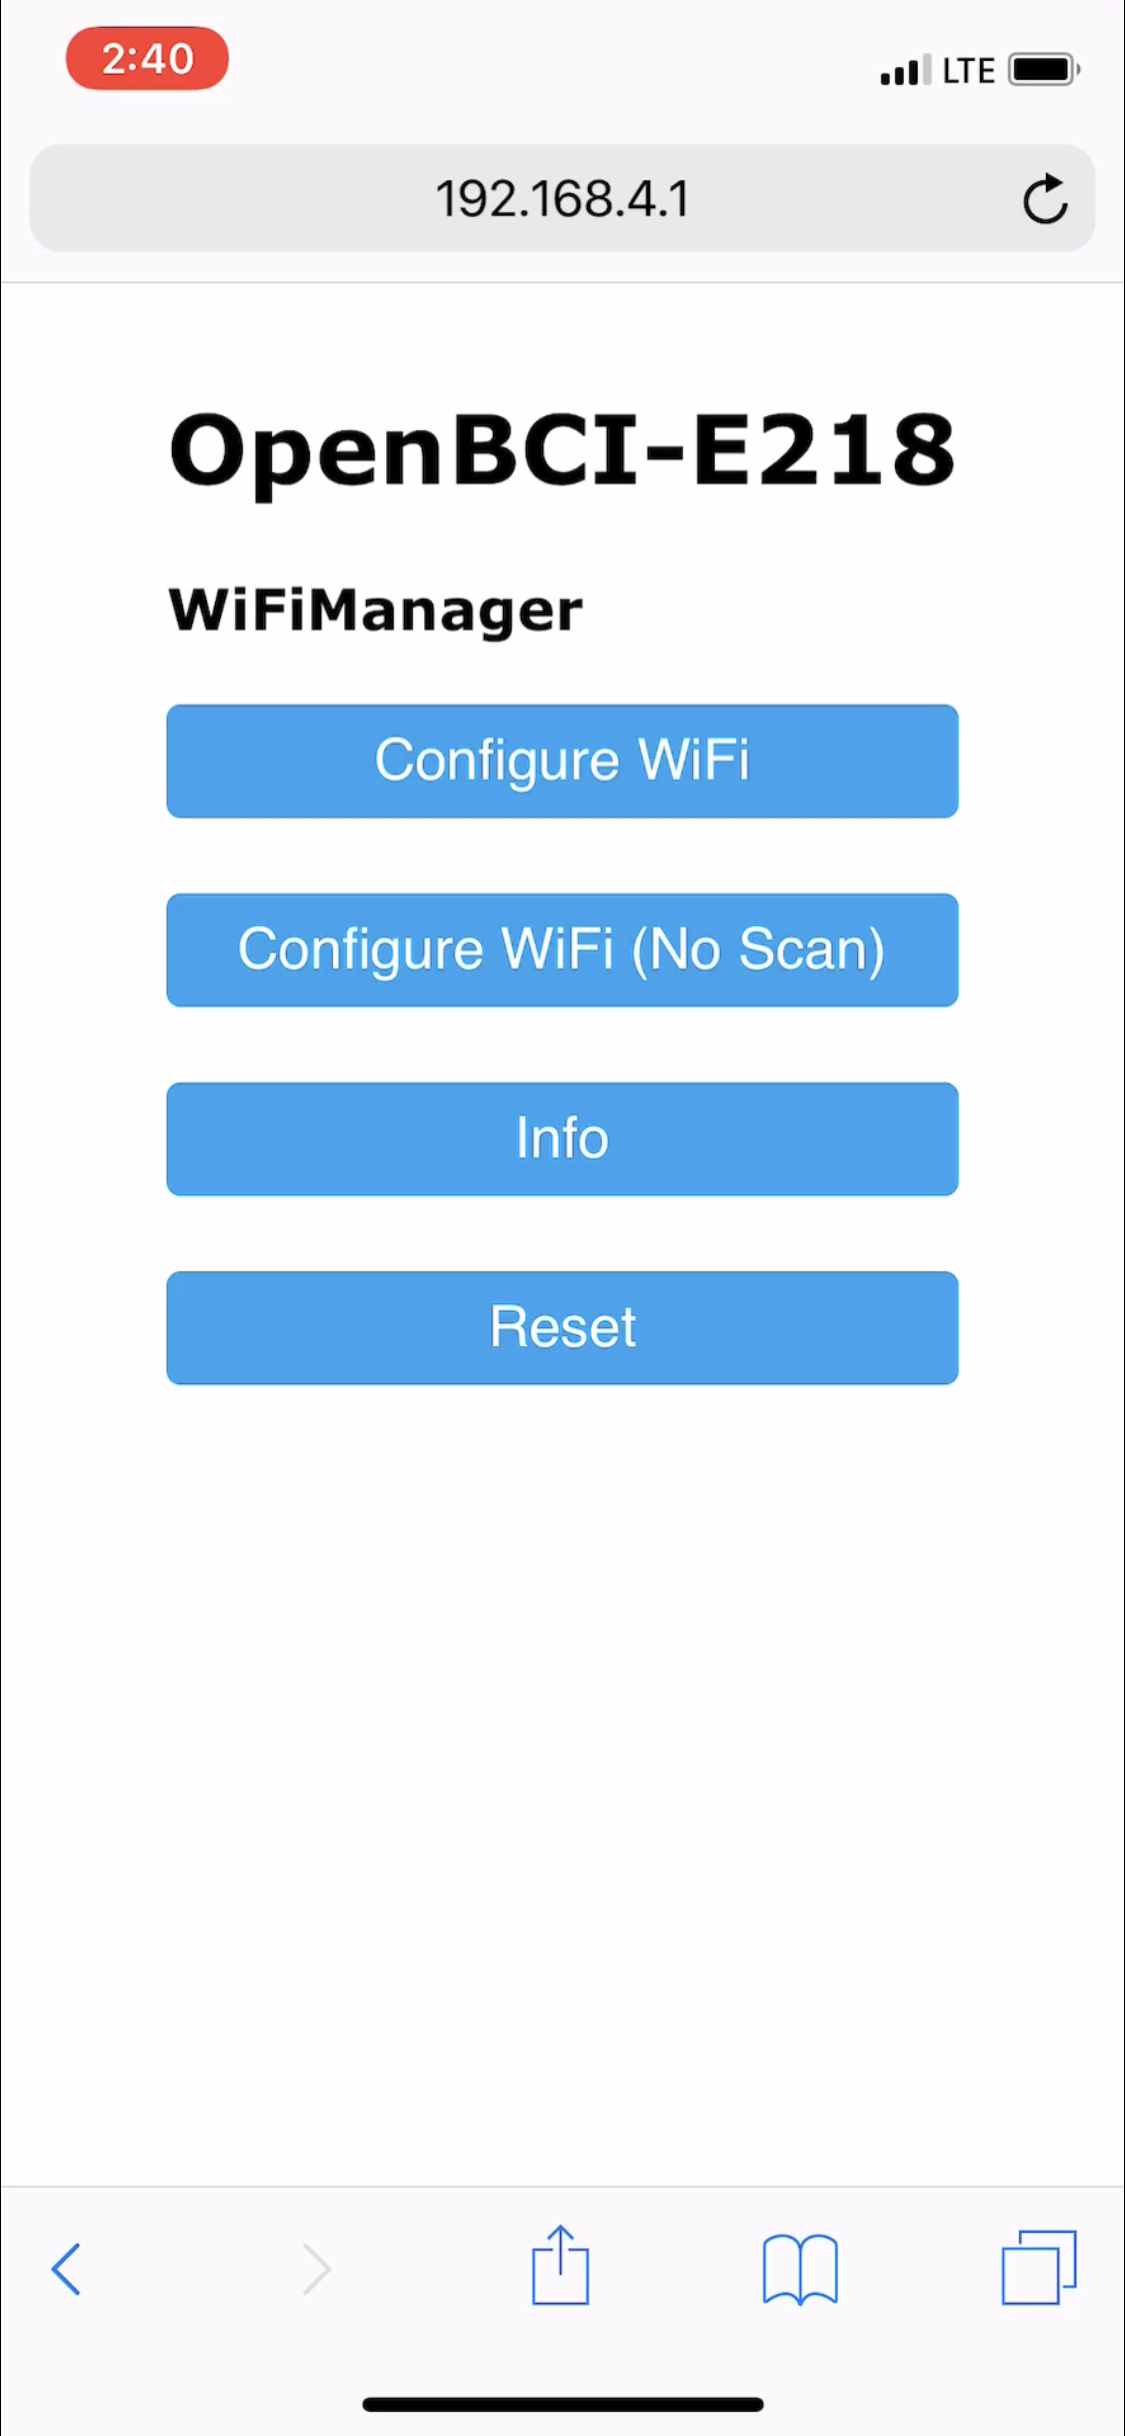 WiFi Manager home page